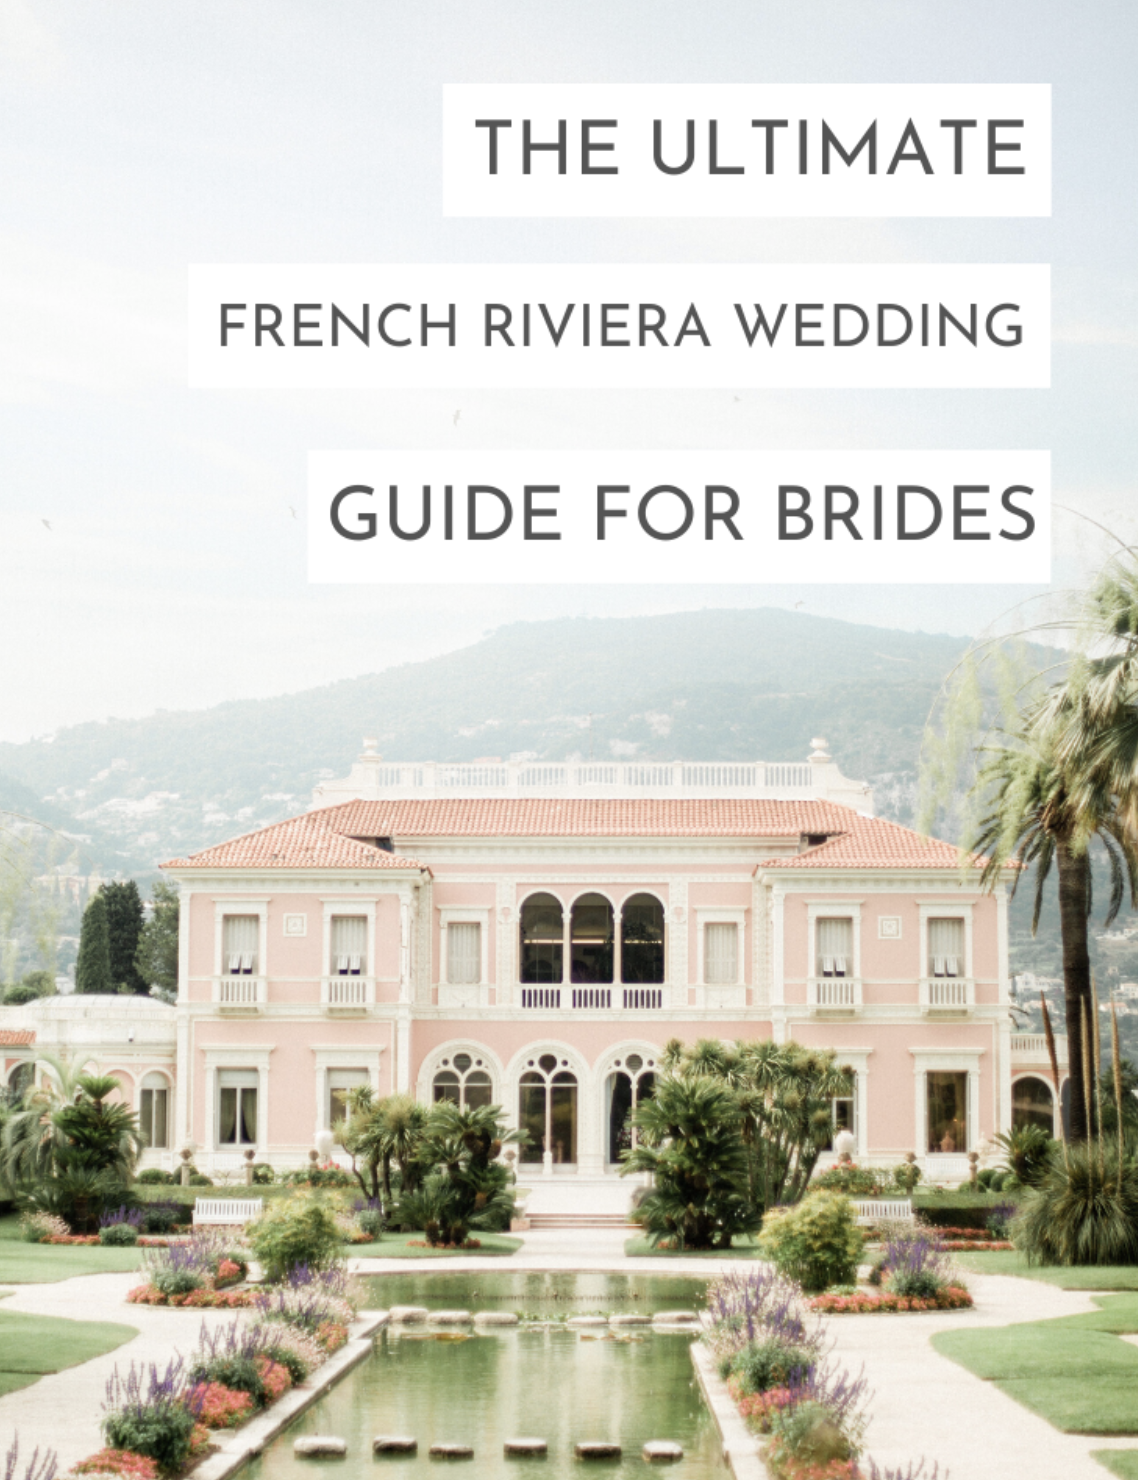 French Riviera Wedding Guide by Claire Macintyre